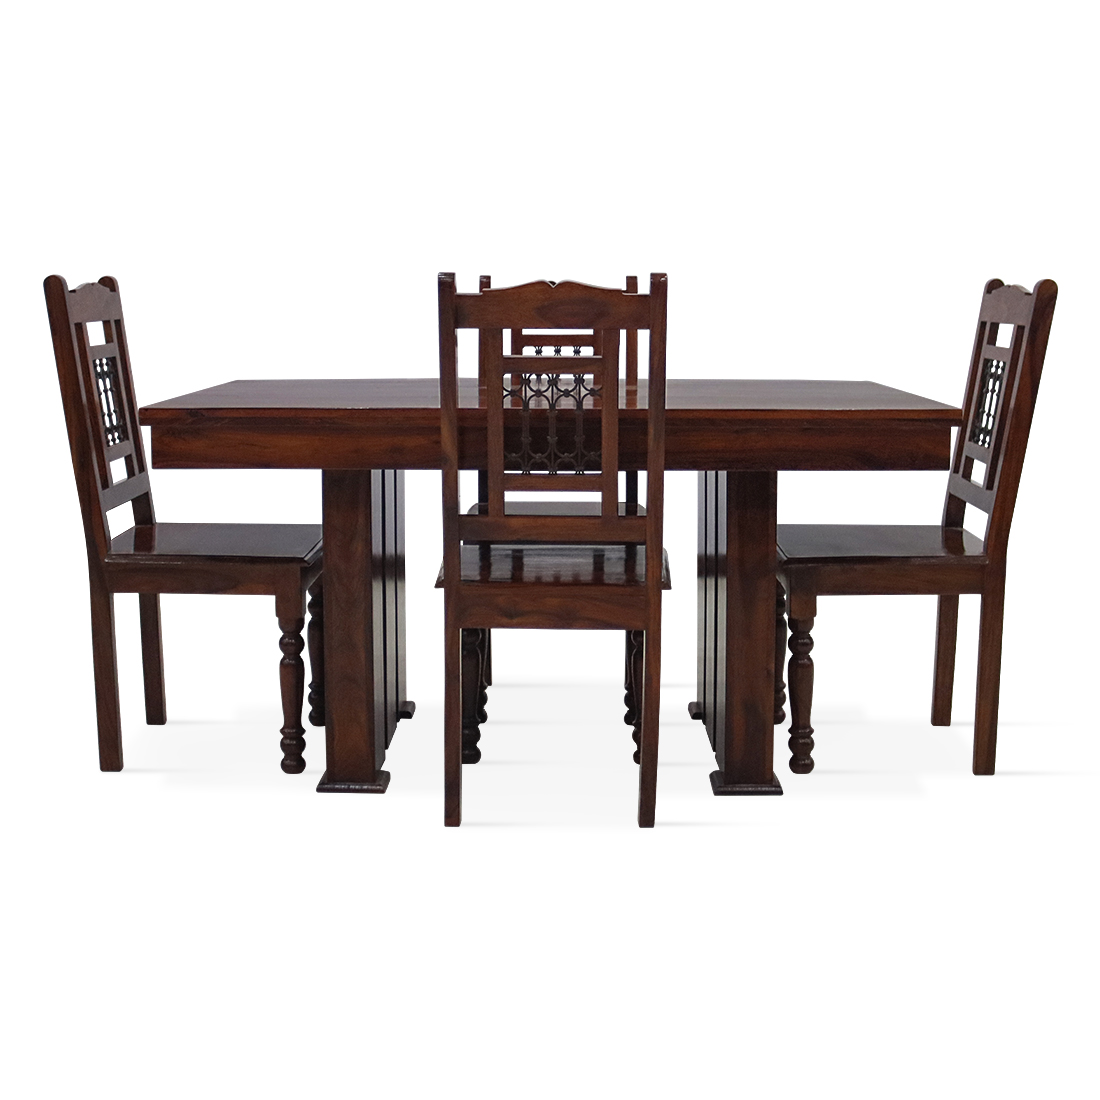 Aaram By Zebrs Furniture Sheesham Wood 6 Seater Dining Table Set with 6 Chairs